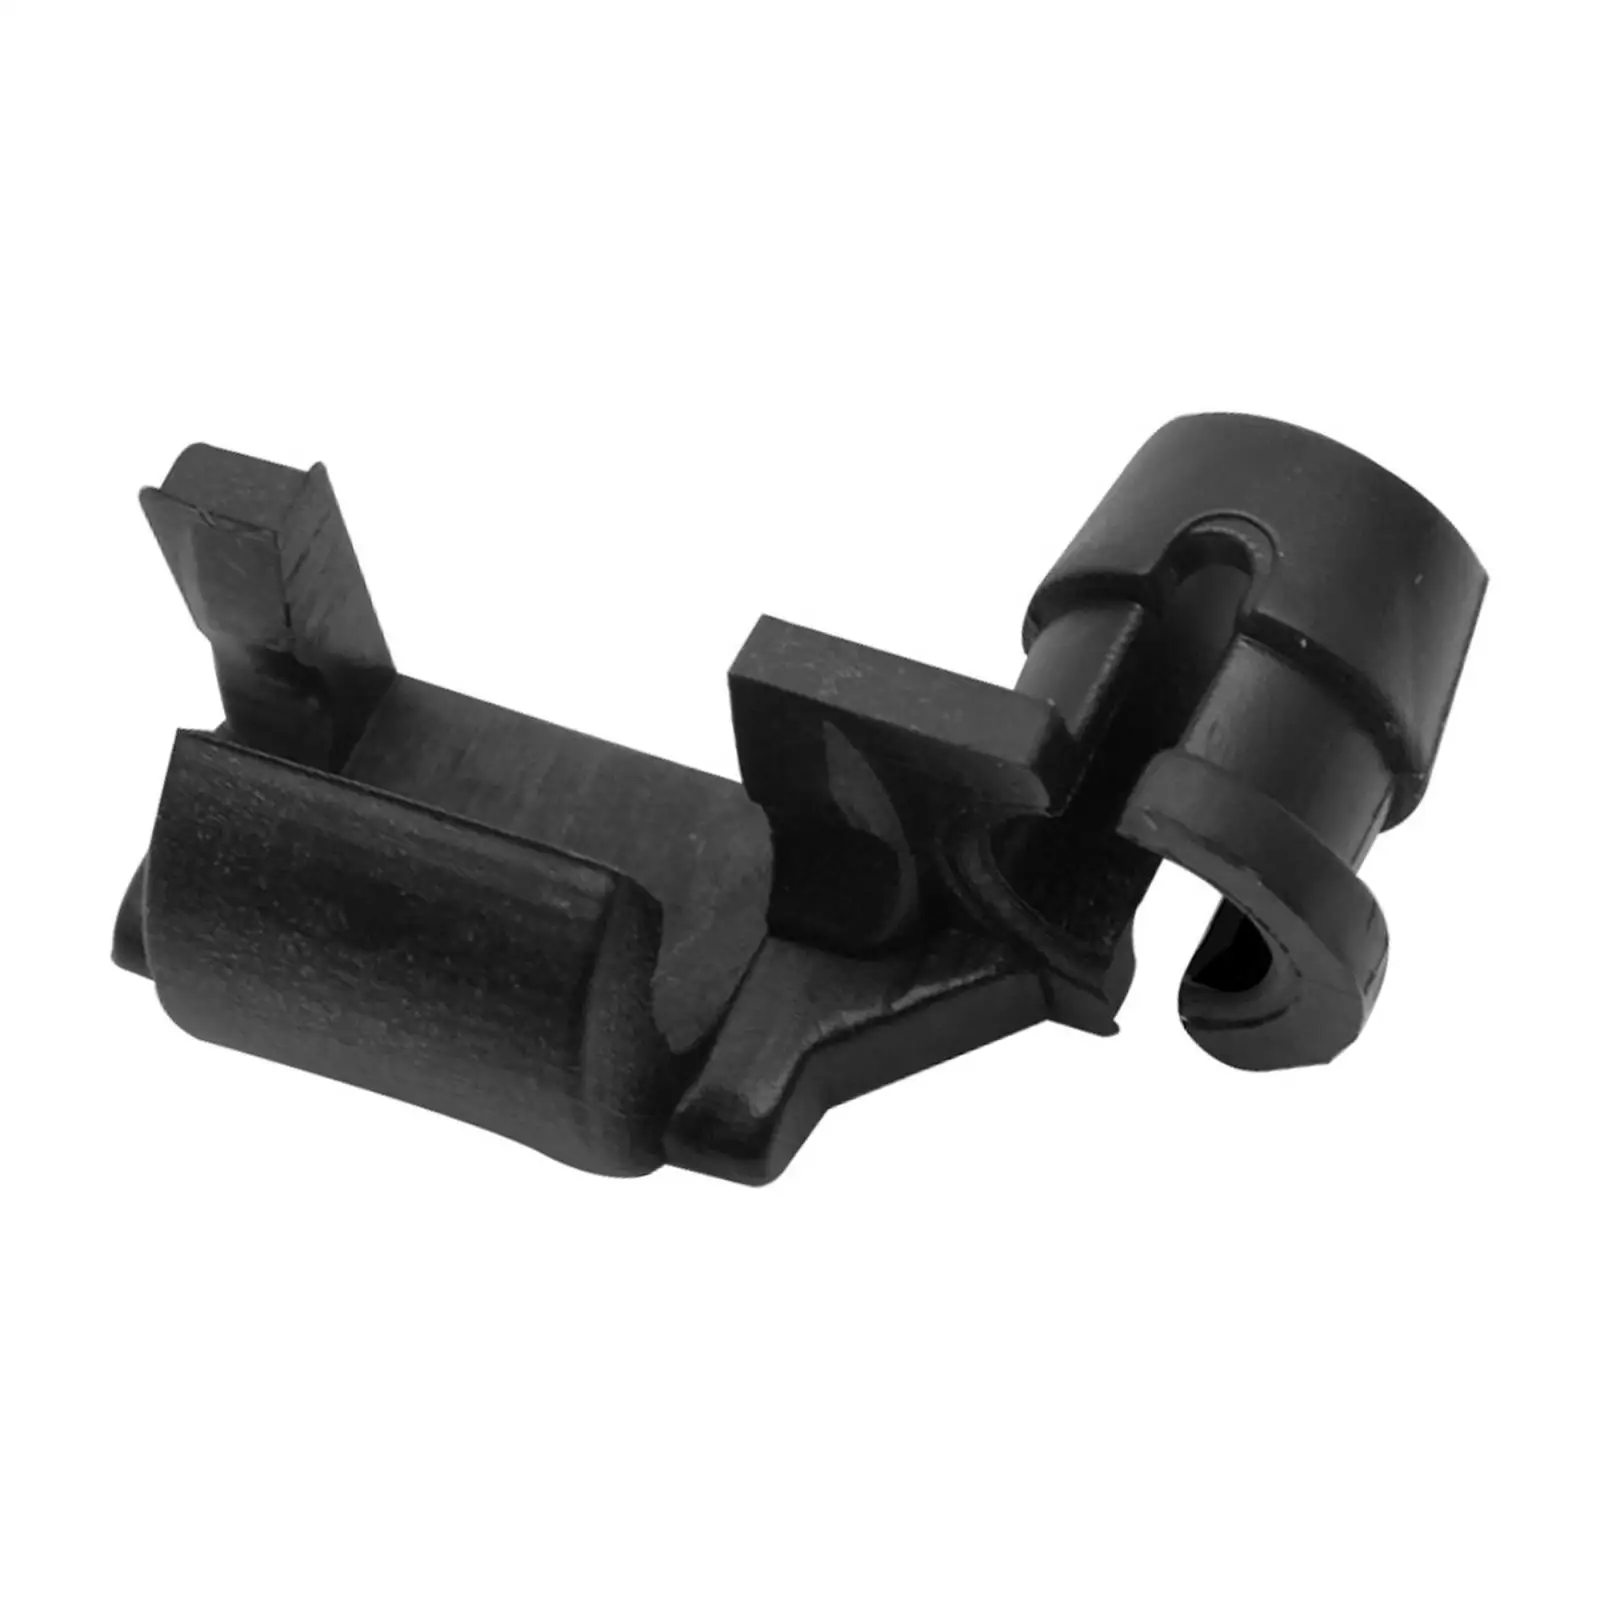 Boat Joint Link 6R5-41237-00 for Yamaha Outboard 4 Stroke 9.9HP-15HP Durable Black Vehicle Repair Parts Stable Performance